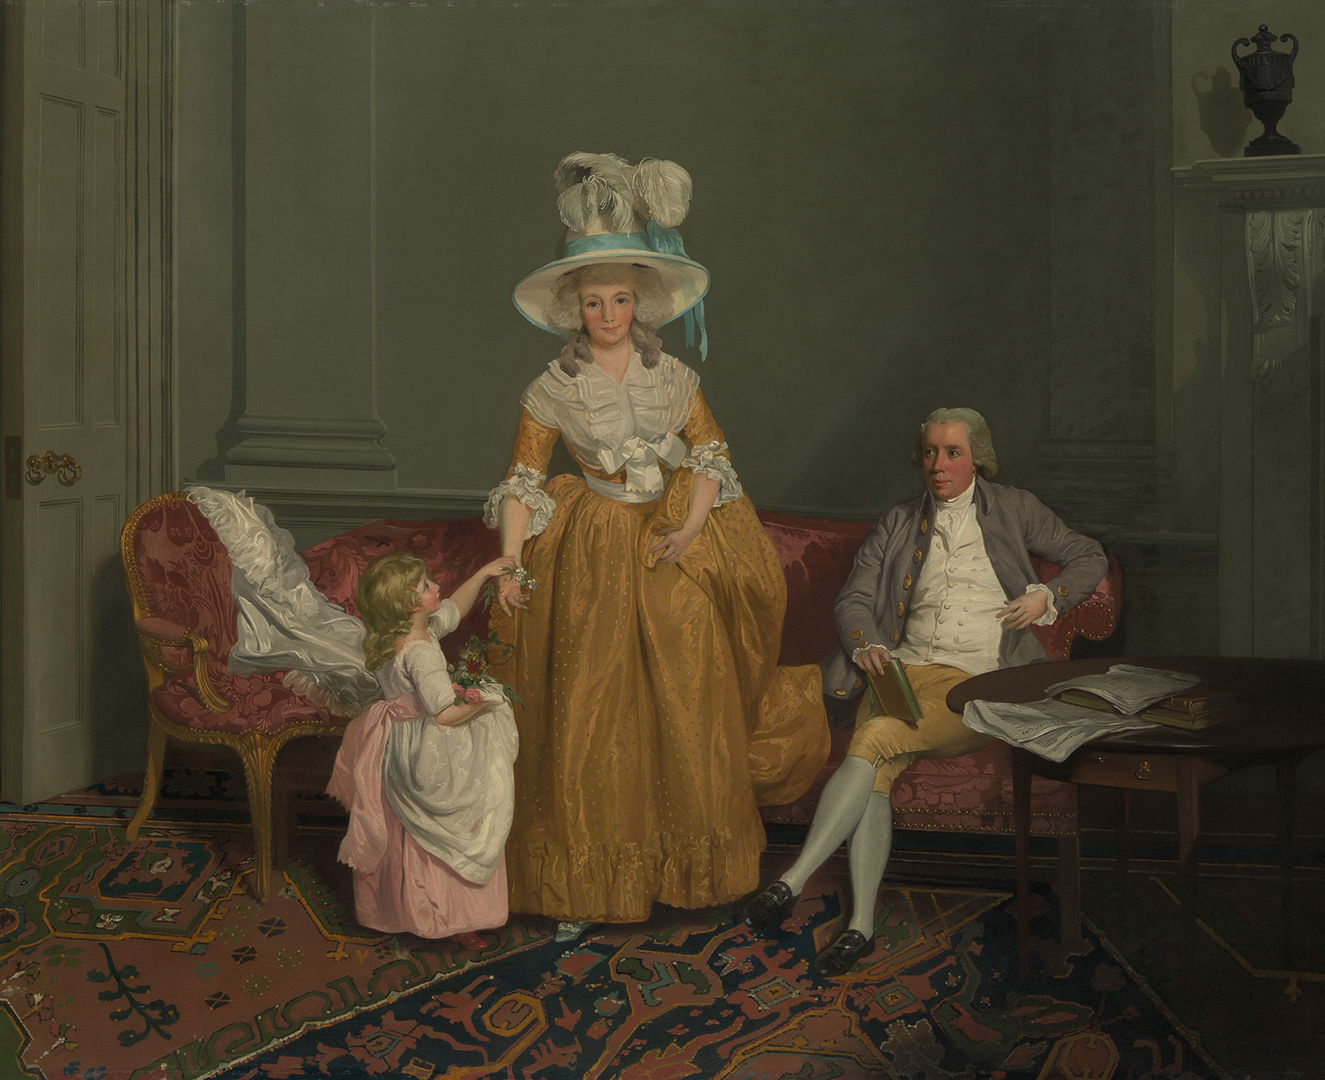 Francis Wheatley’s portrait of the Saithwaite family which depicts a mother in the center, a father sitting next to her on a couch, and their your child to the left of the woman. 